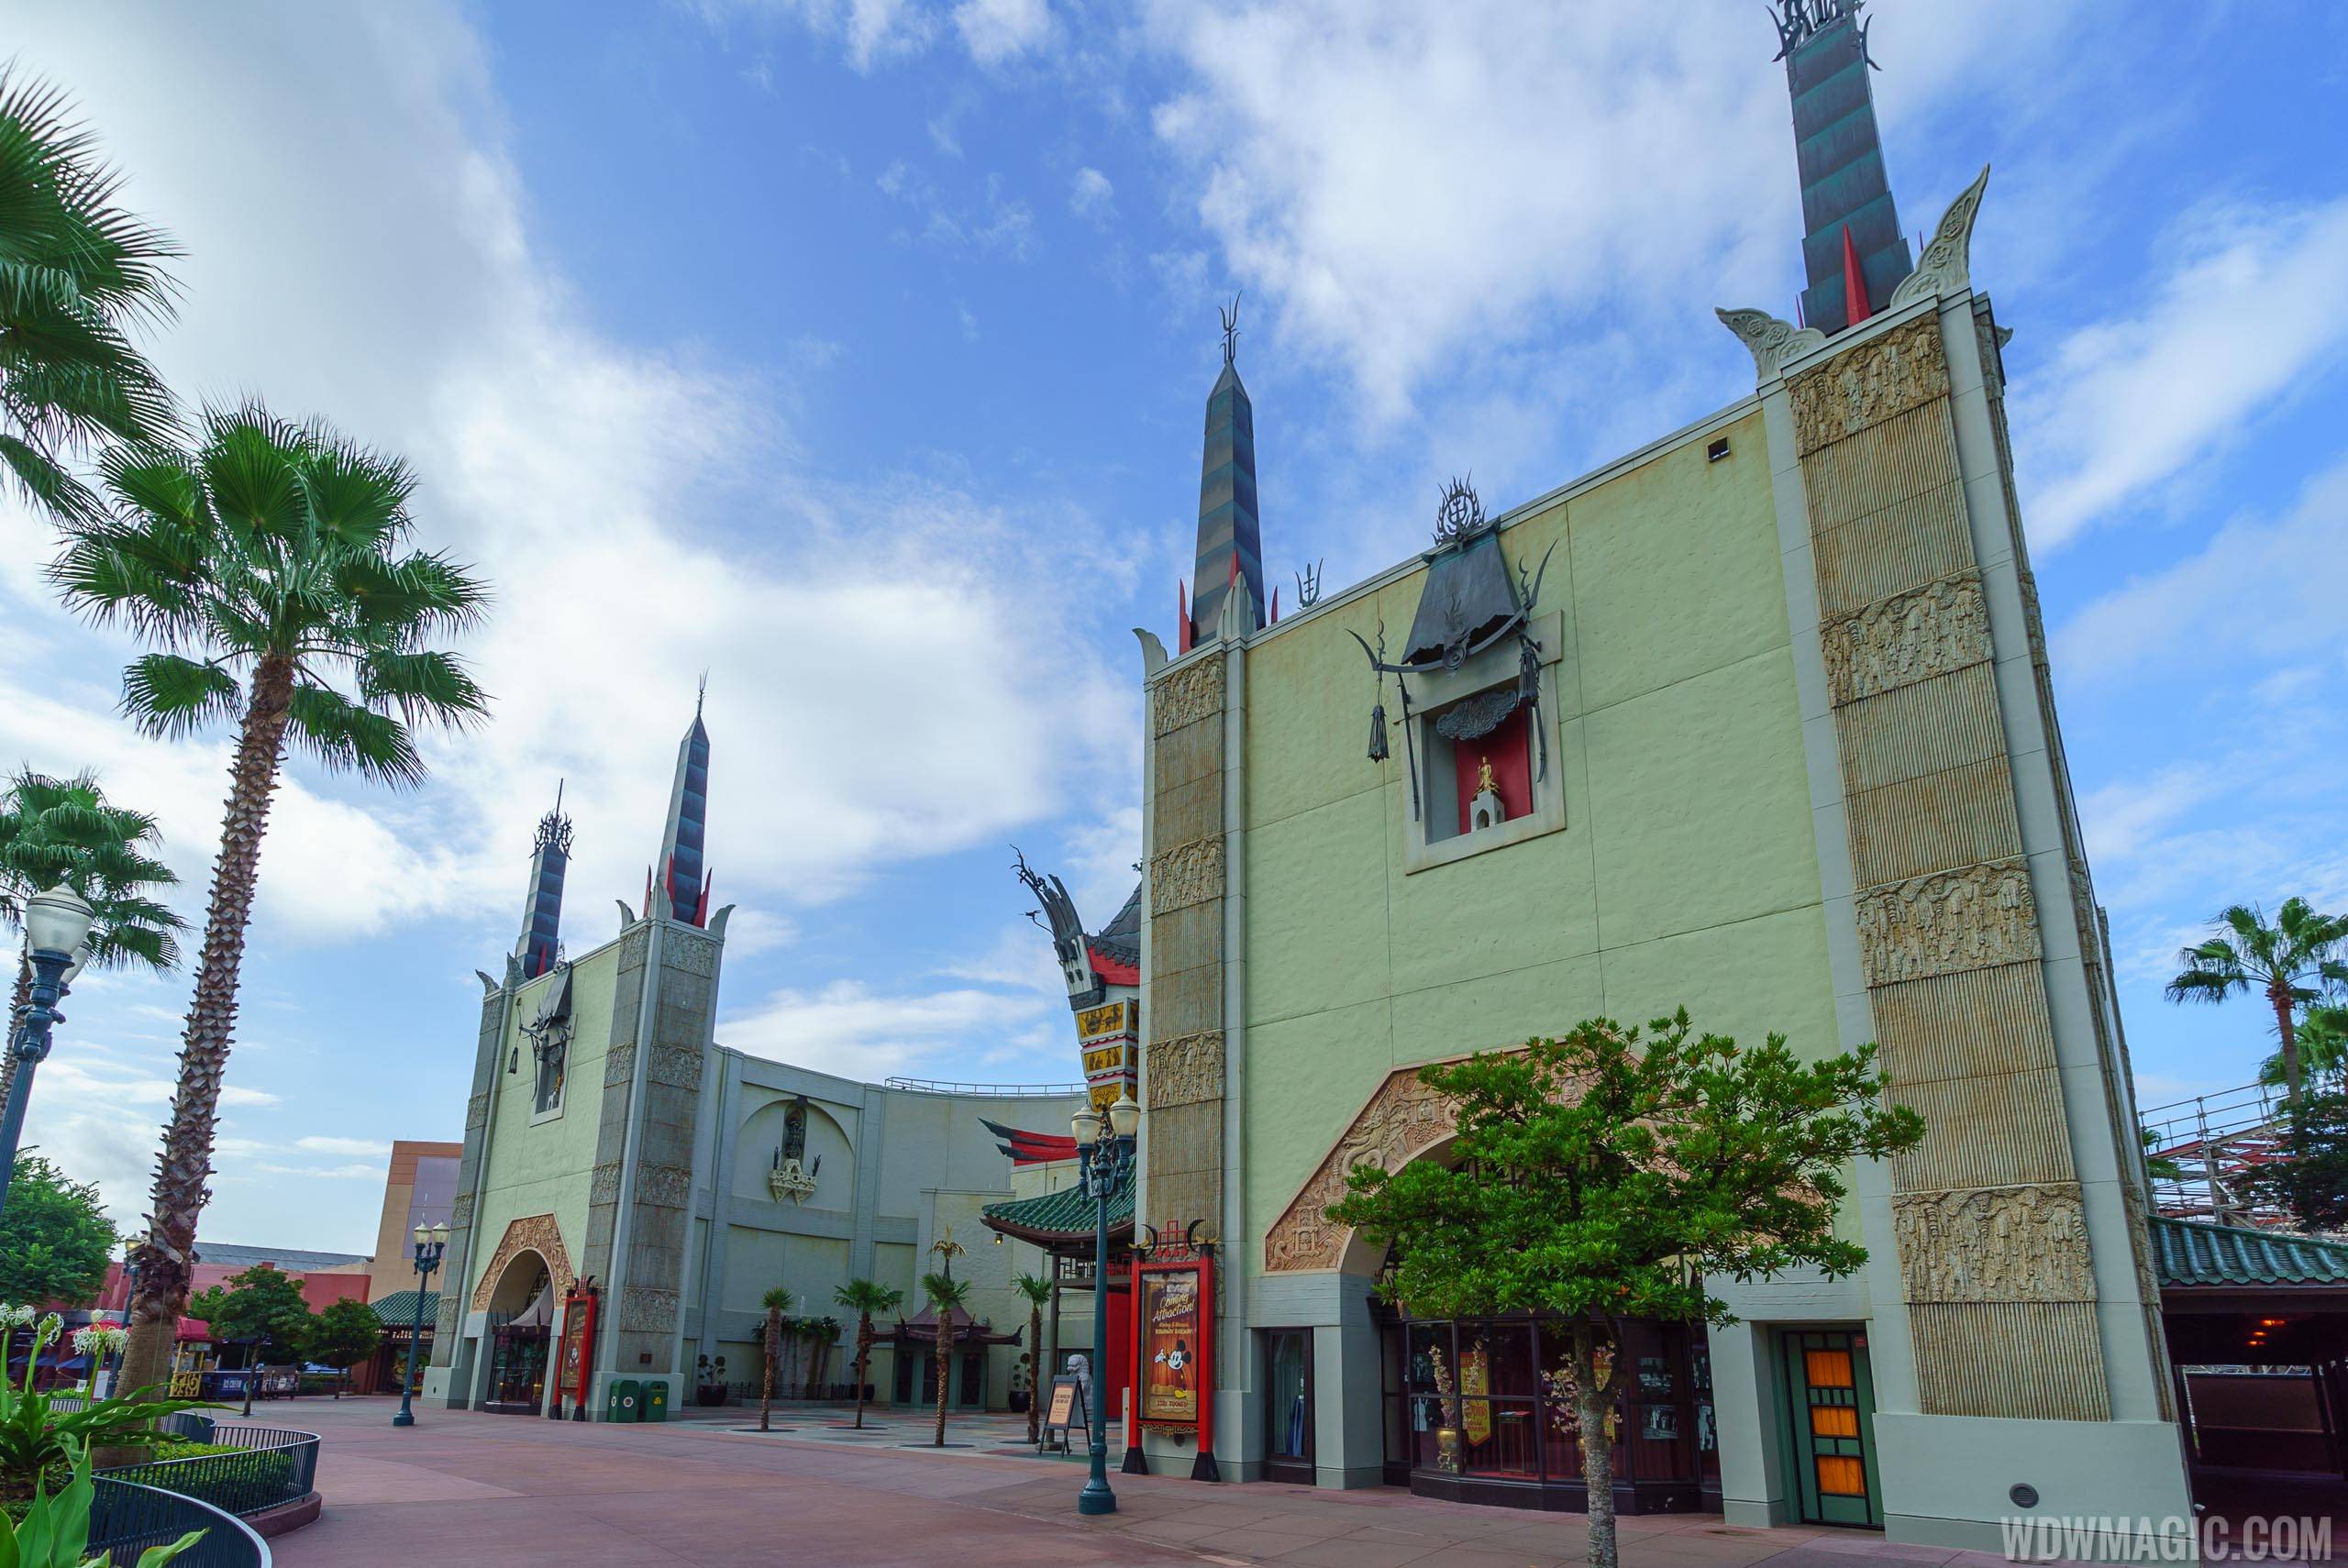 The Great Movie Ride signs removed from the Chinese Theater